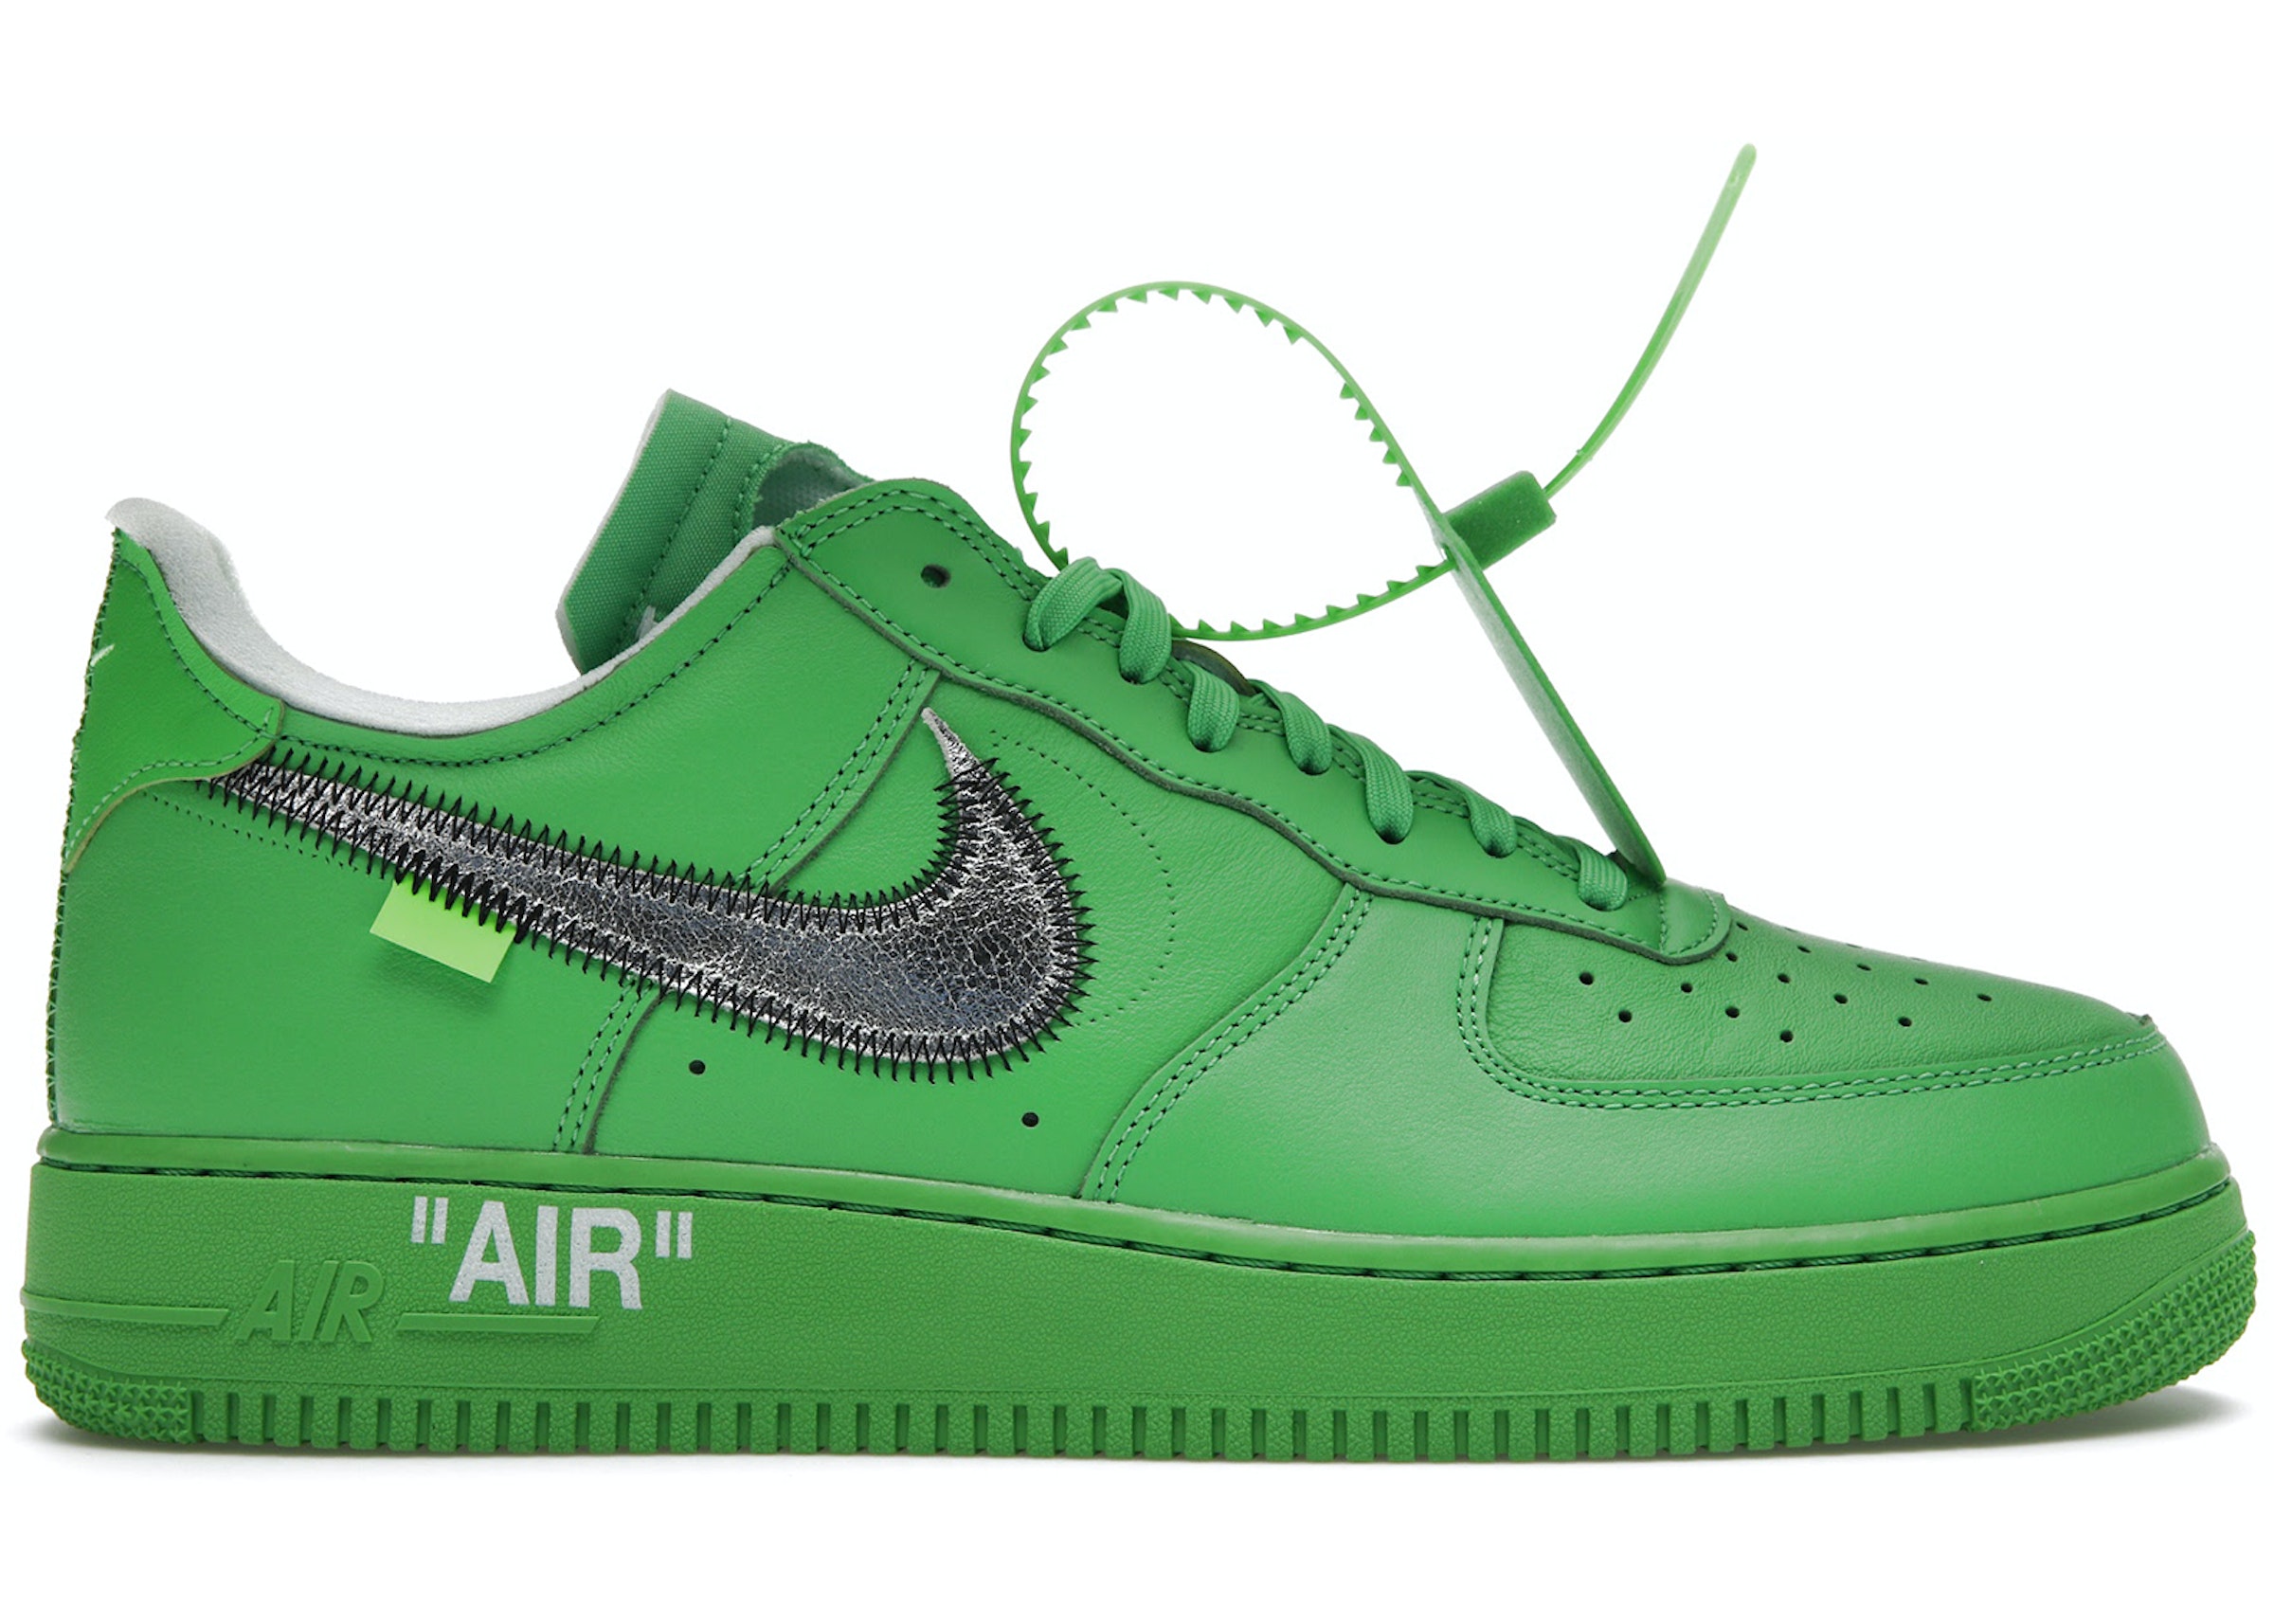 Flat clue Activate Nike Air Force 1 Low Off-White Brooklyn Men's - DX1419-300 - US